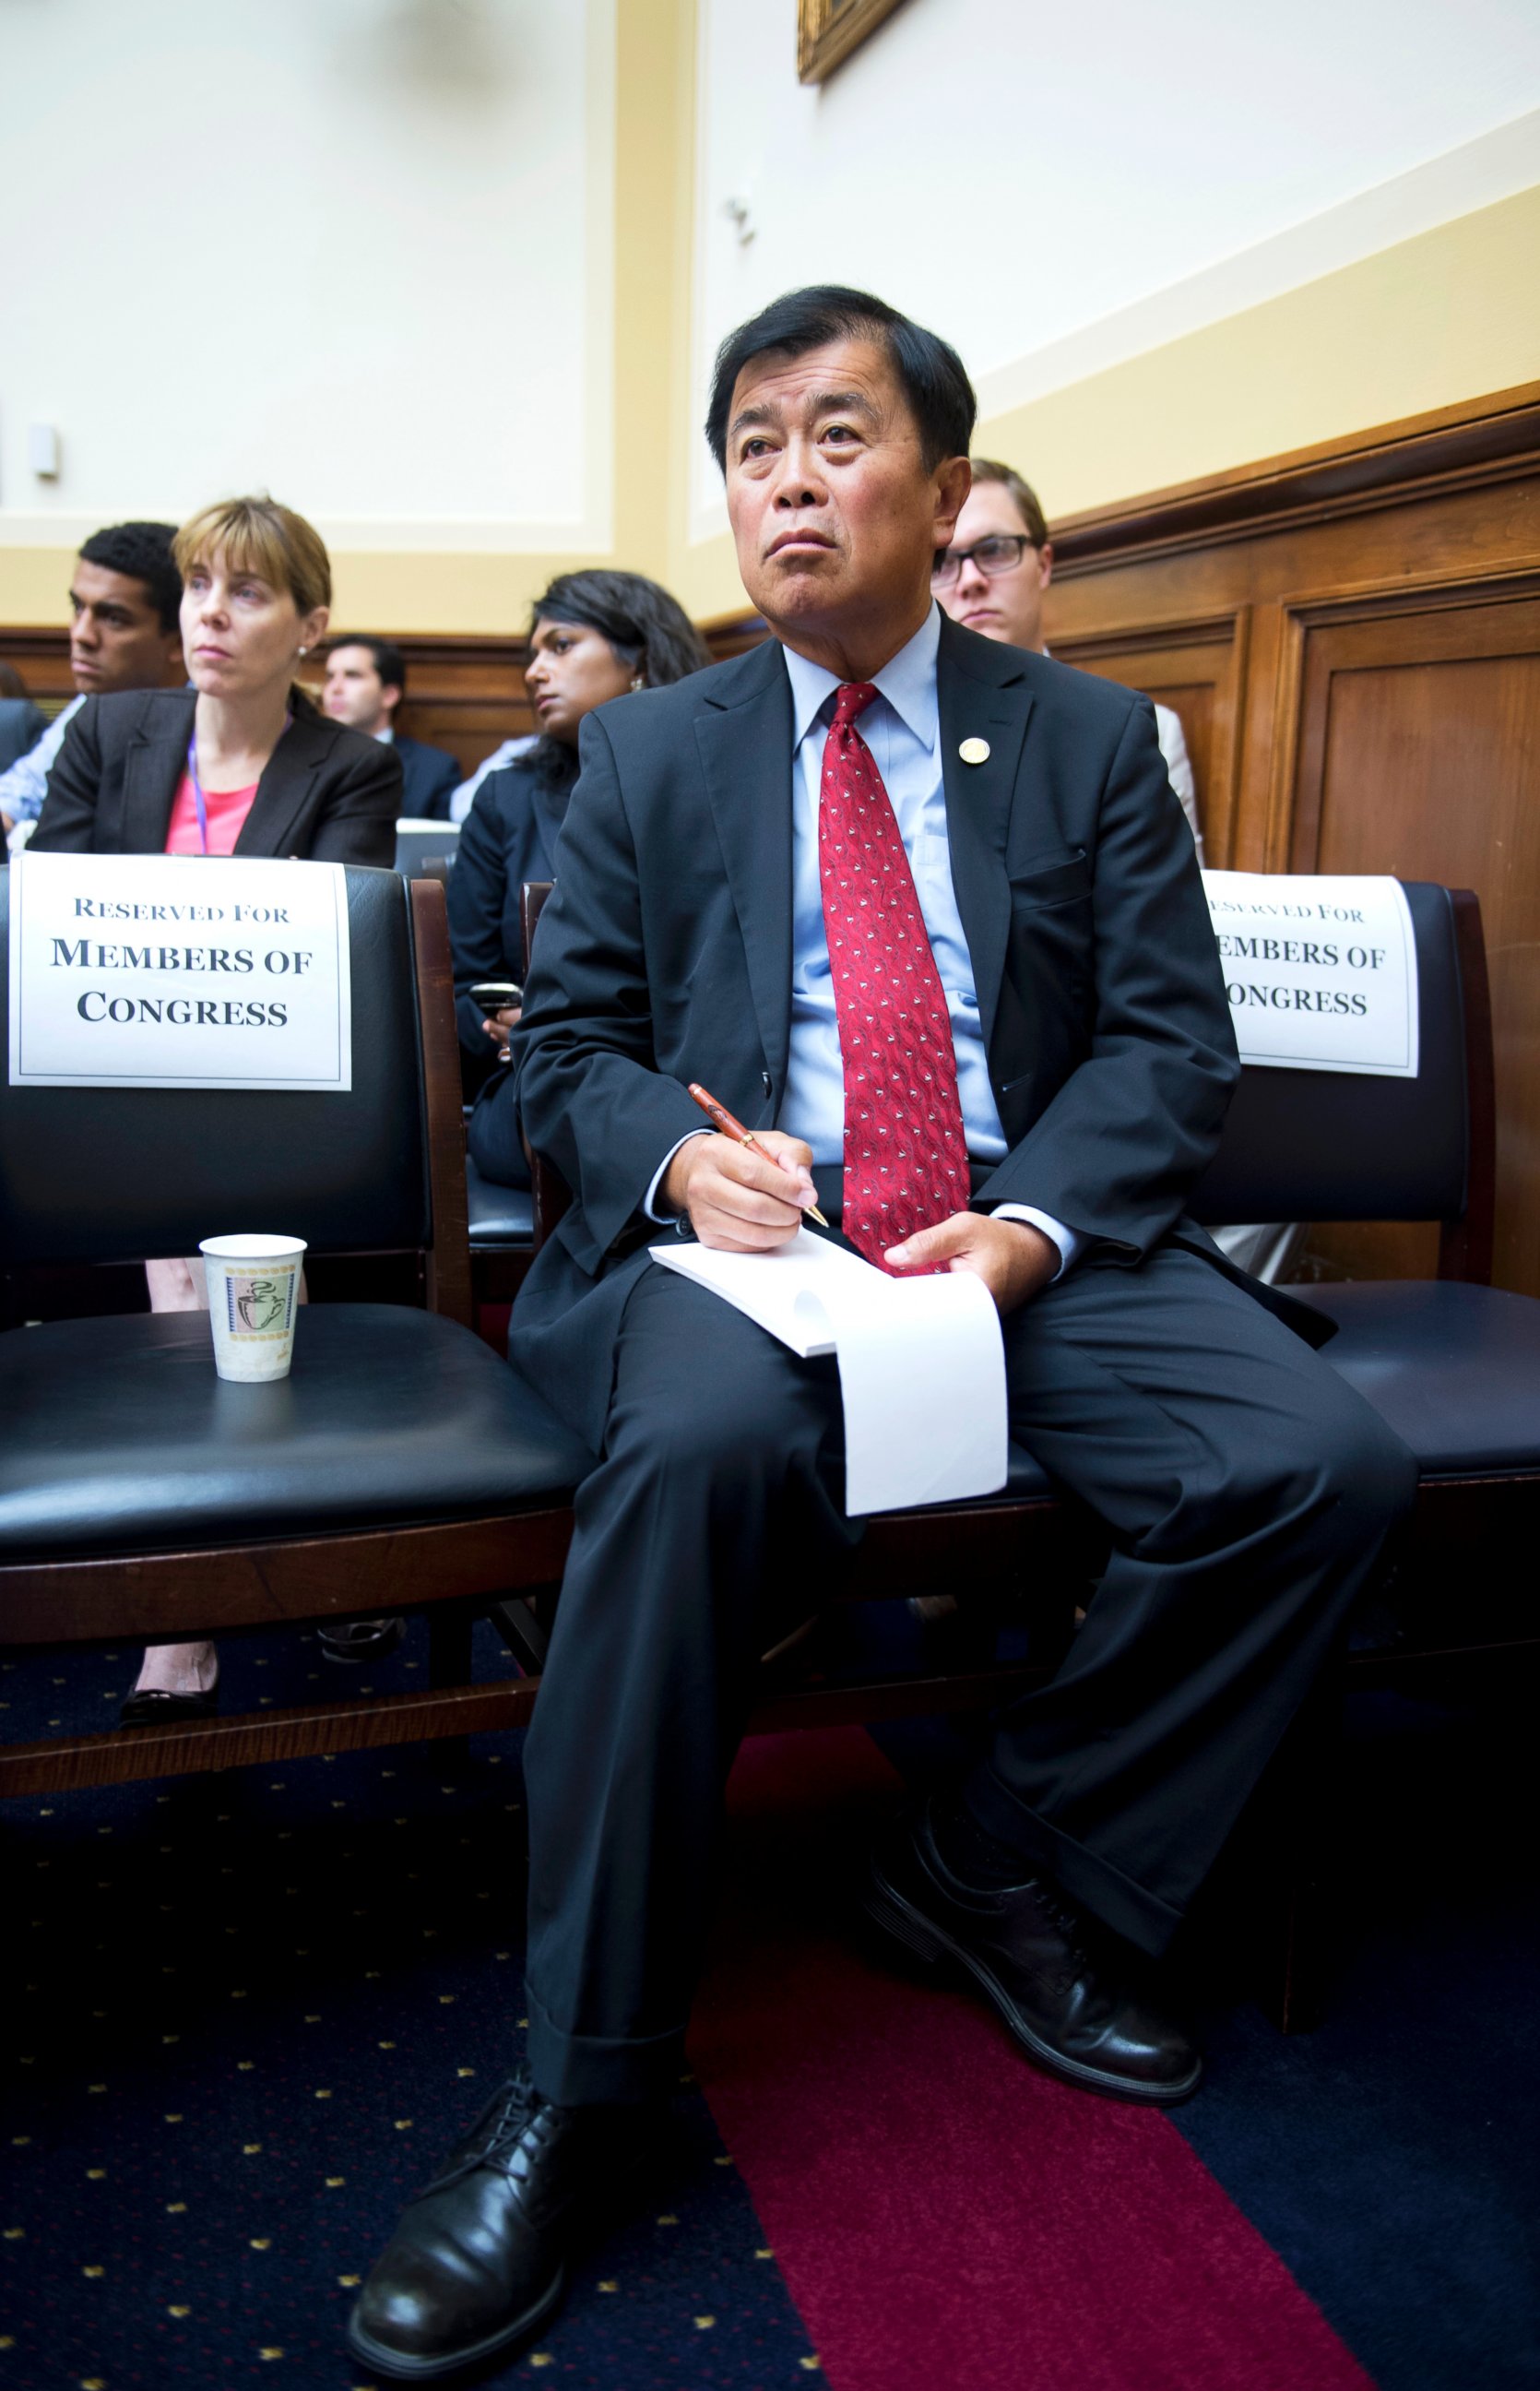 PHOTO: Former Rep. David Wu, D-Ore., attends a House Foreign Affairs Committee hearing in Rayburn Building on the Obama administration's response to Syria's alleged use of chemical weapons.